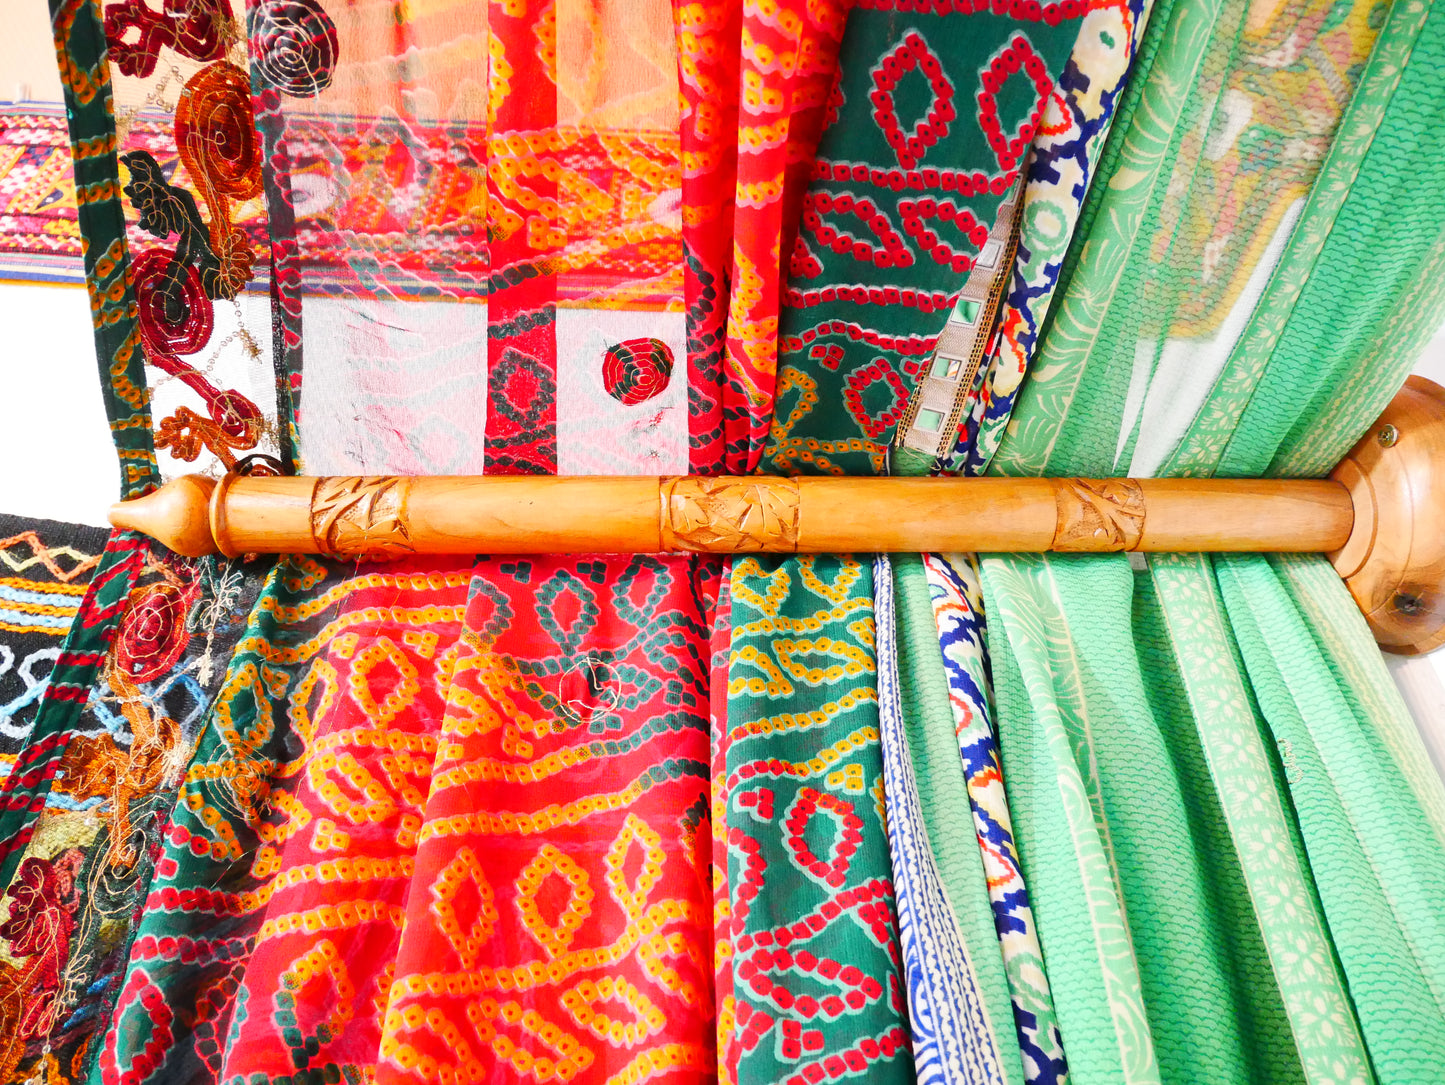 Saree Bed canopy - with handcrafted walnut wood rods and vintage Indian sarees